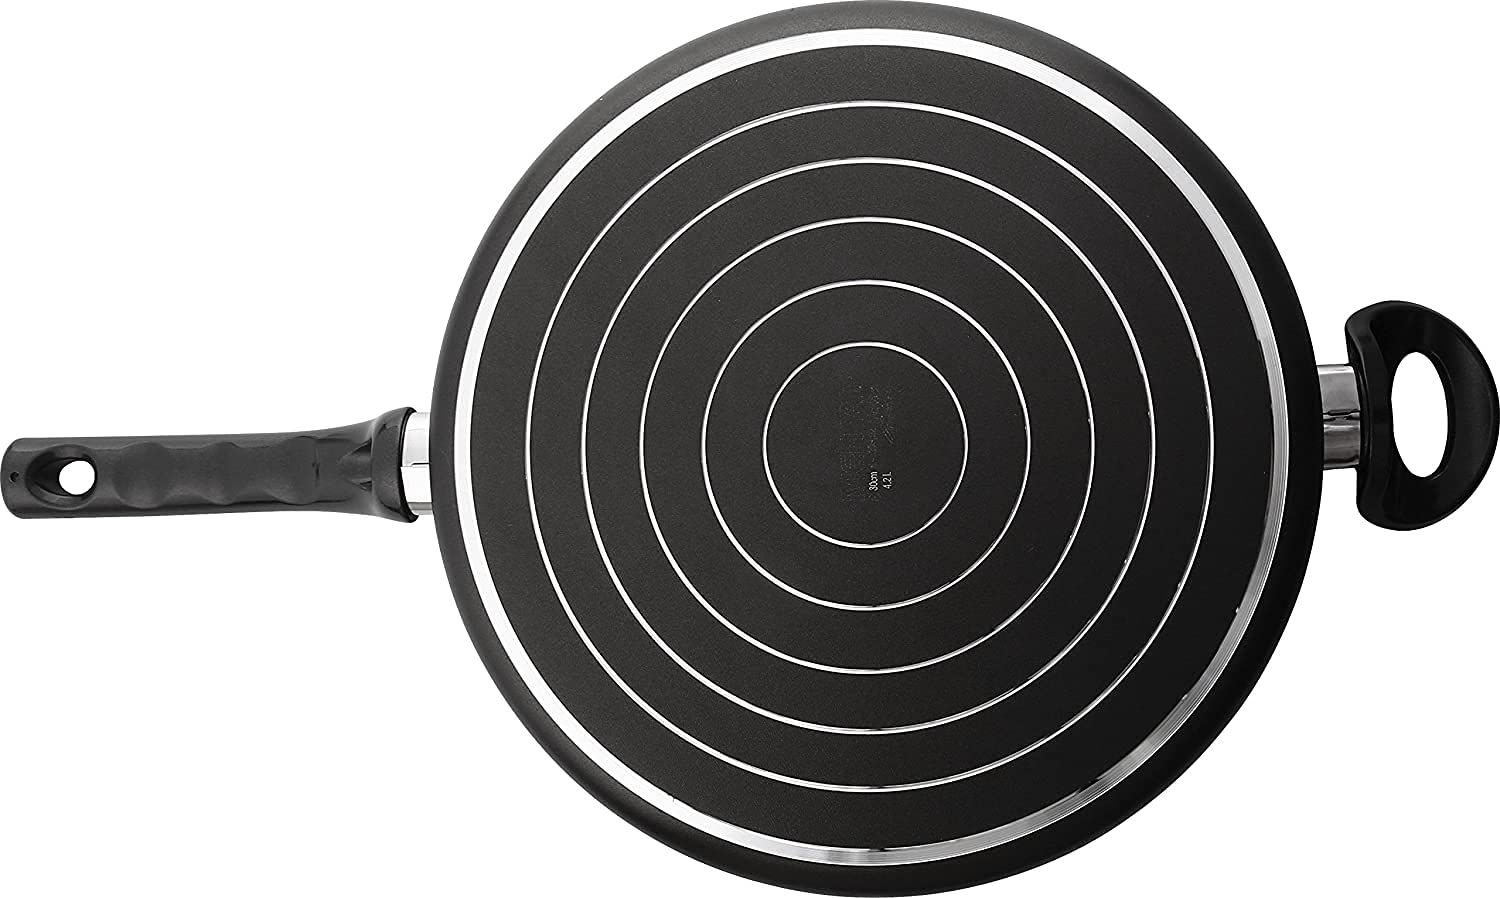 Mehtap 13 Inch Saute Pan with Lid and Two Handles, Teflon Classic Nonstick Frying Skillet Cookware for Simmering, Sautéing, and Braising, Black